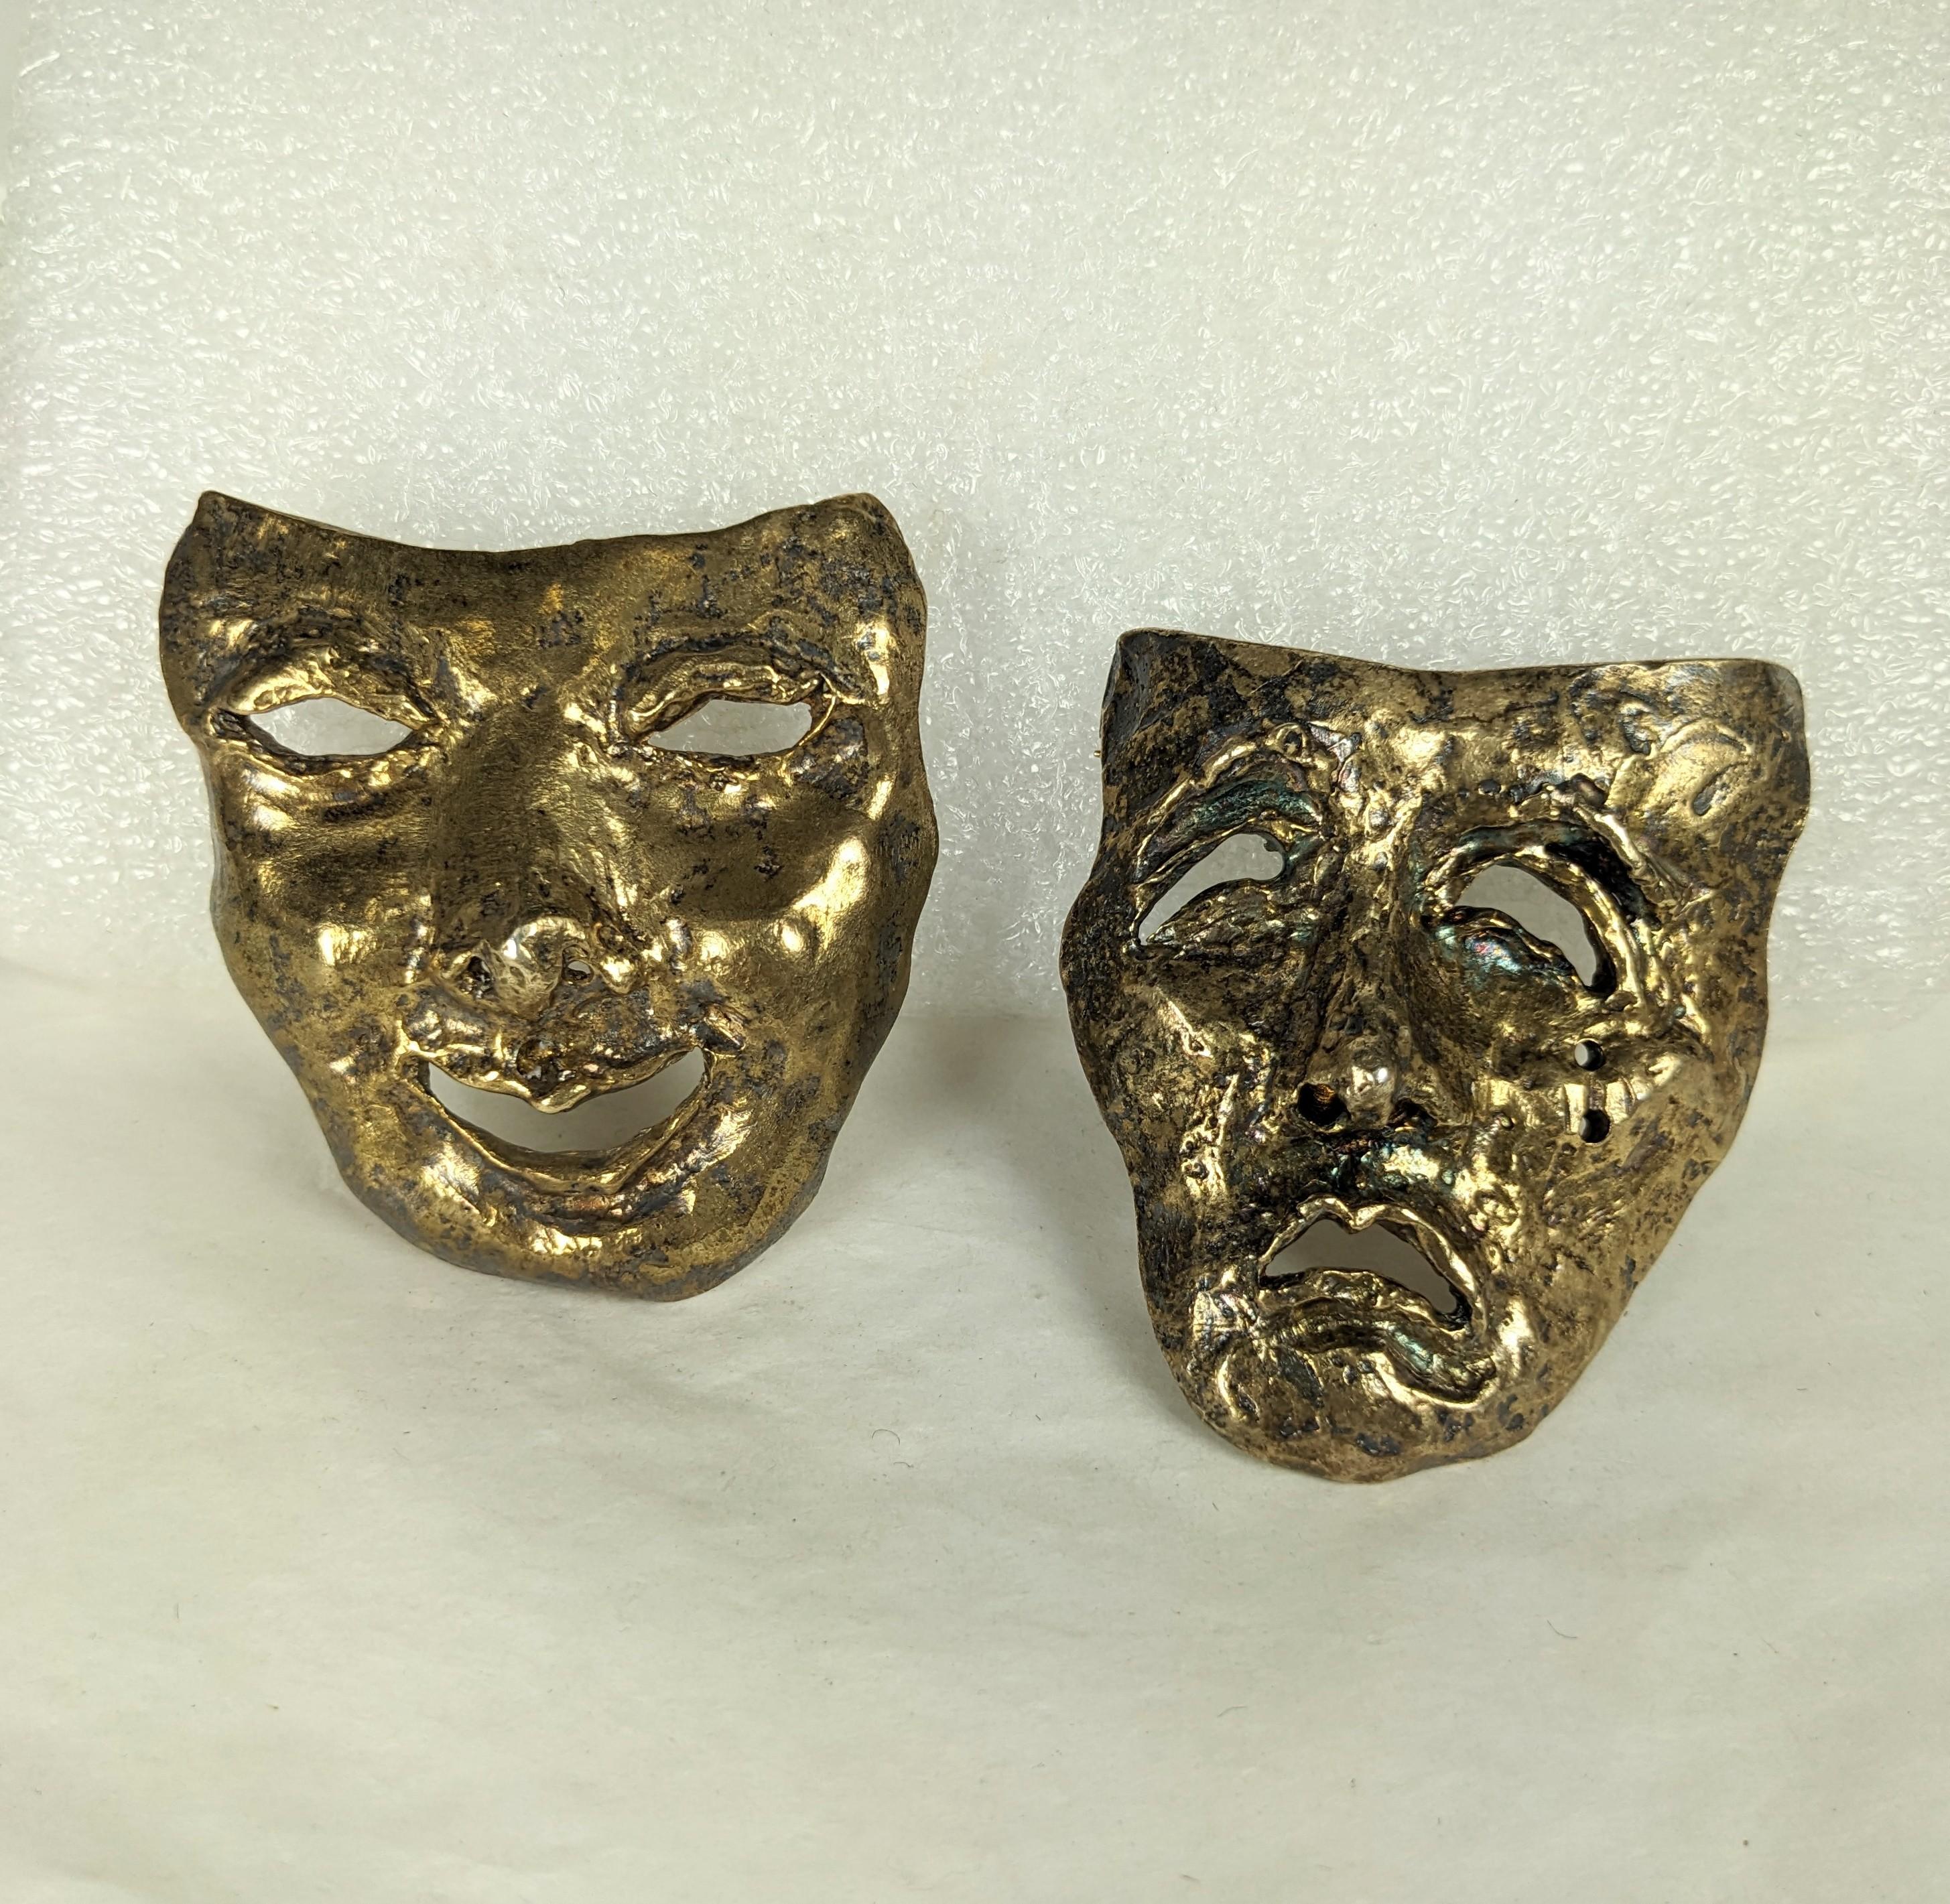 Pair of striking Vermeil Sterling Comedy Tragedy Brooches by Judy Gold circa 1980's. Large in scale with loops for use as pendants as well. Heavy gauge sterling. Each 2.25